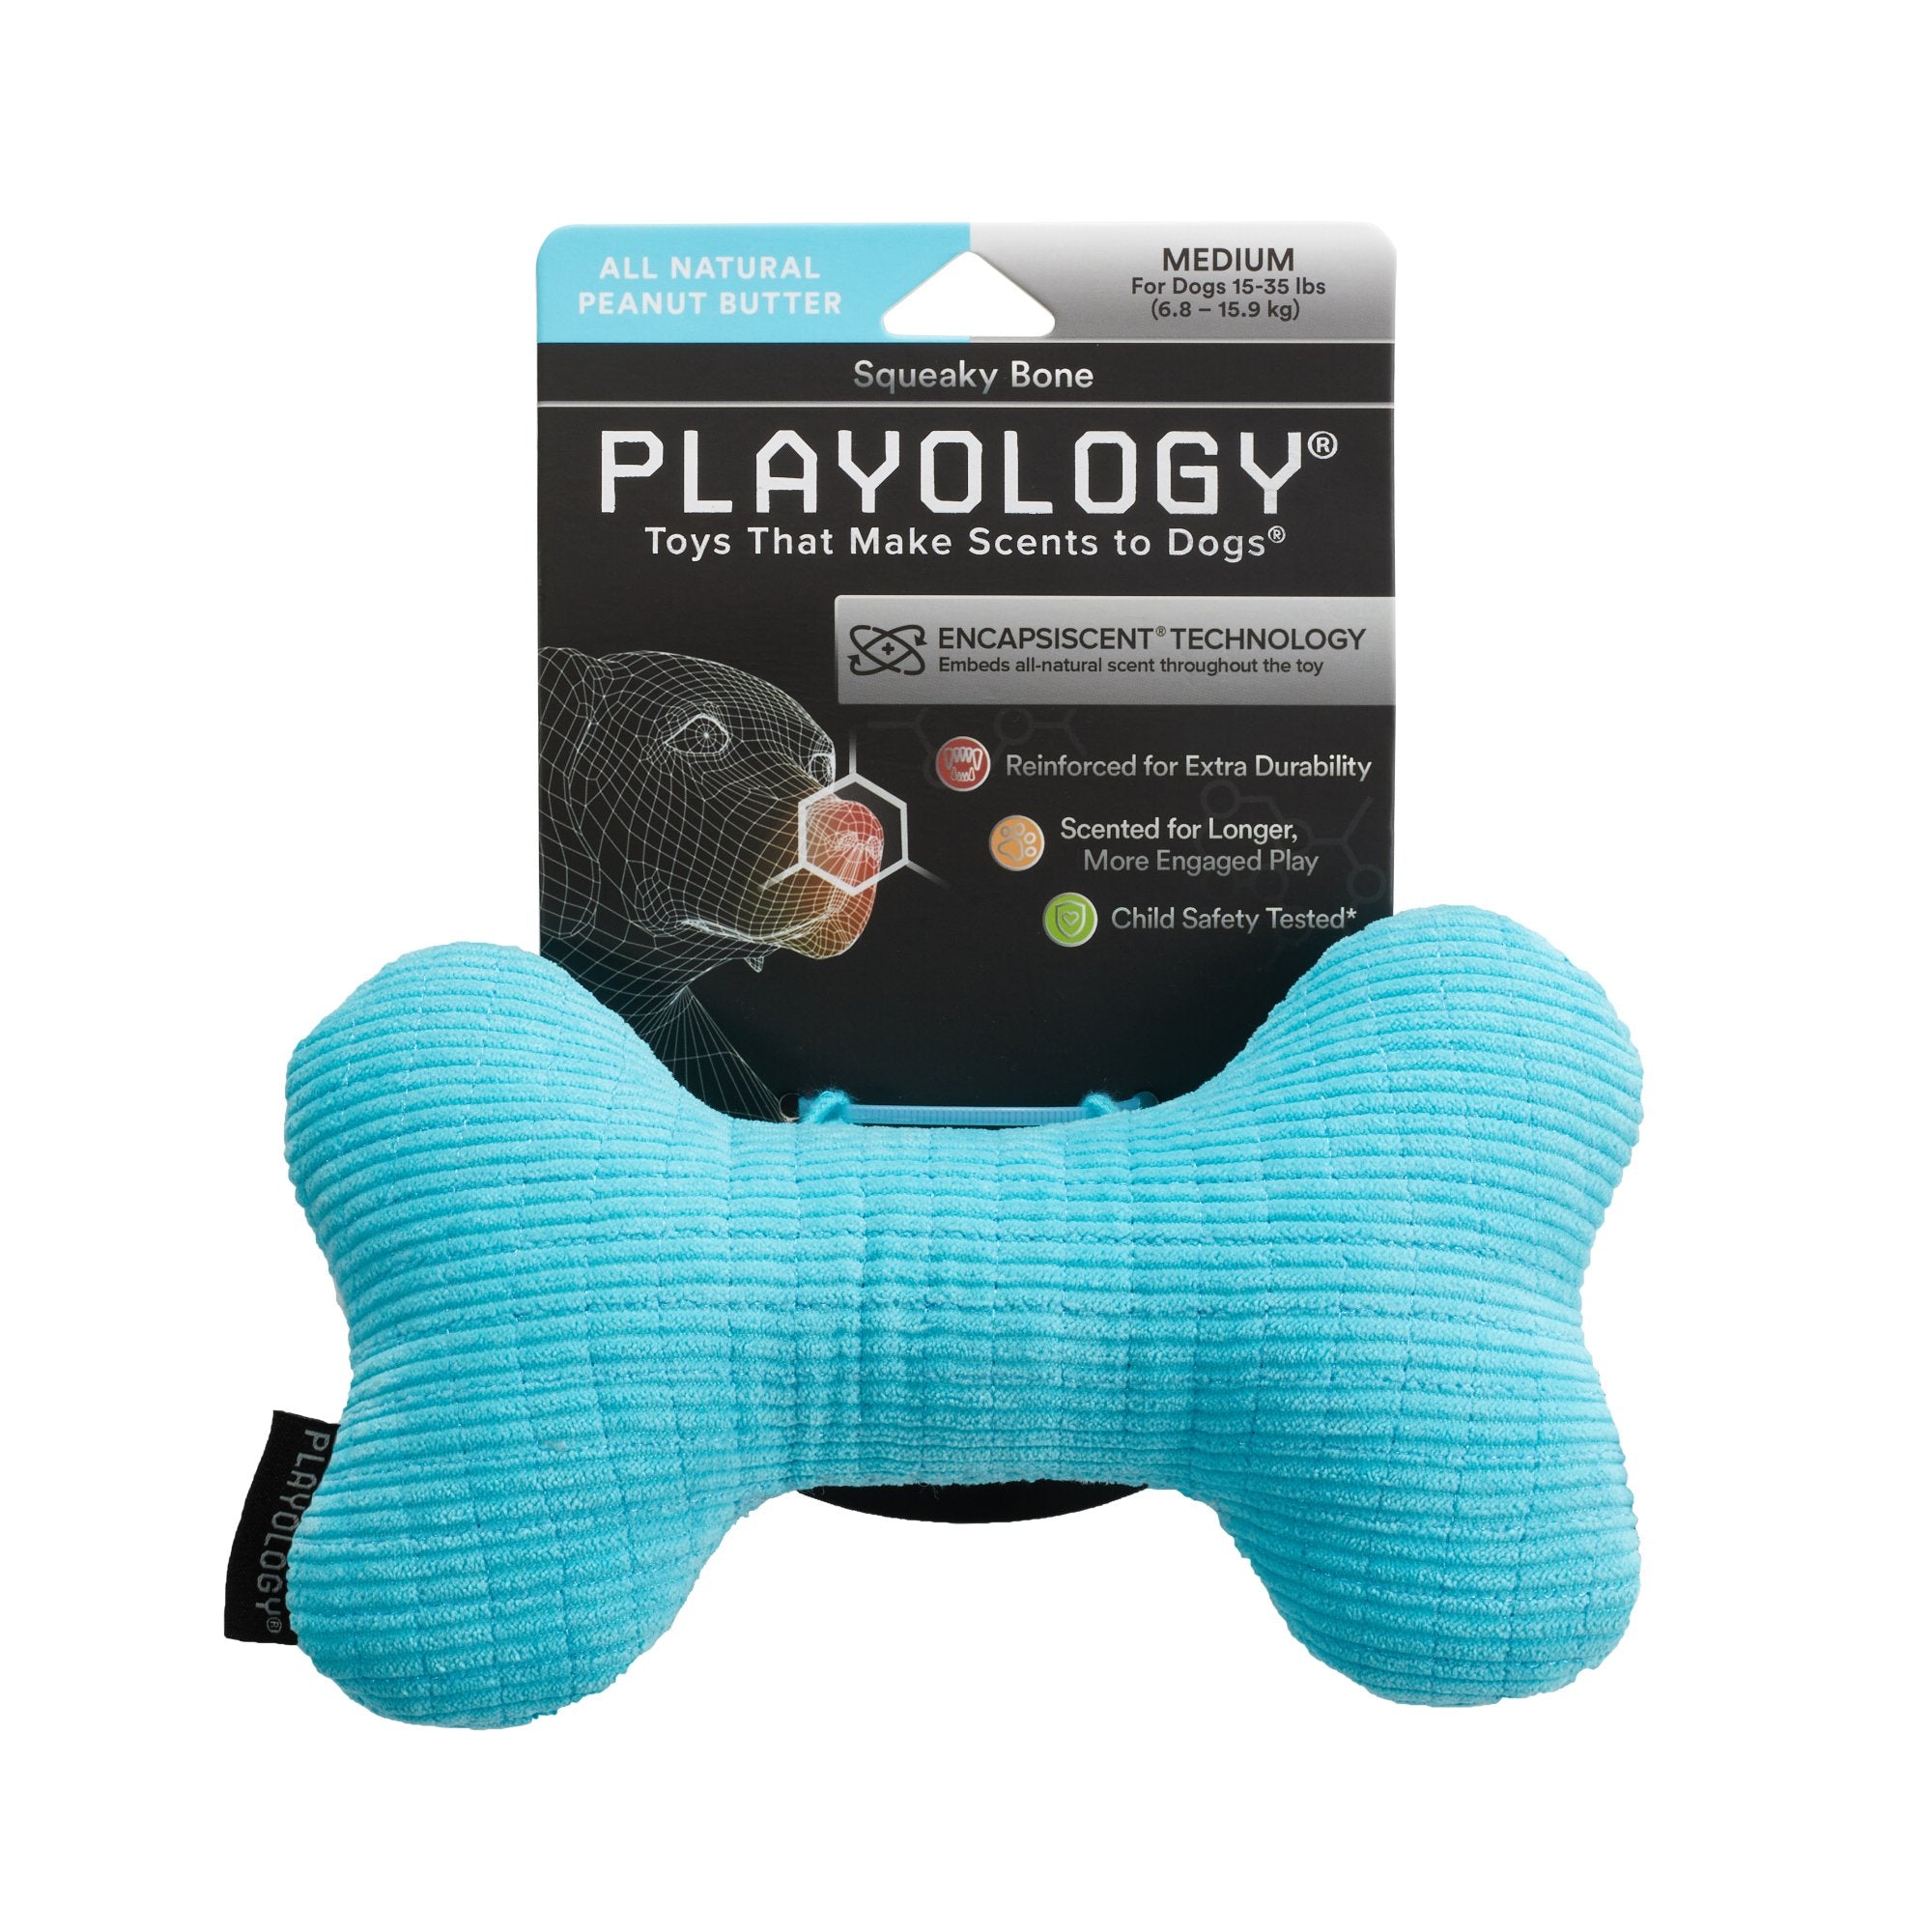 Playology Plush Squeaky Bone Dog Toy Peanut Butter - Mutts & Co.